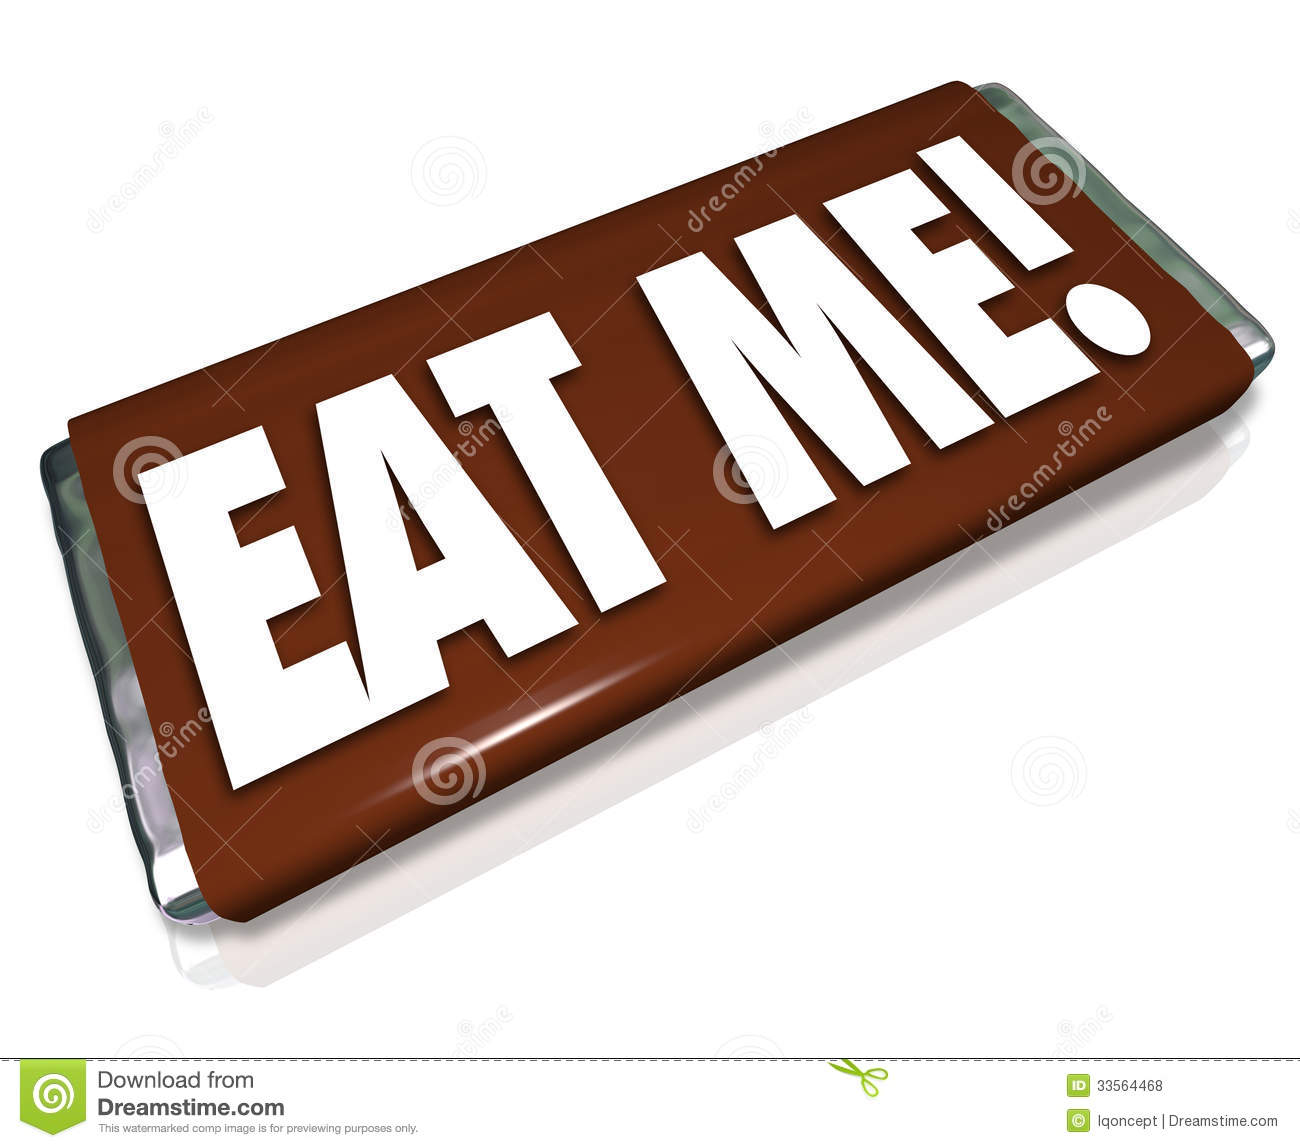 The Words Eat Me On A Chocolate Candy Bar Wrapper To Encourage You To